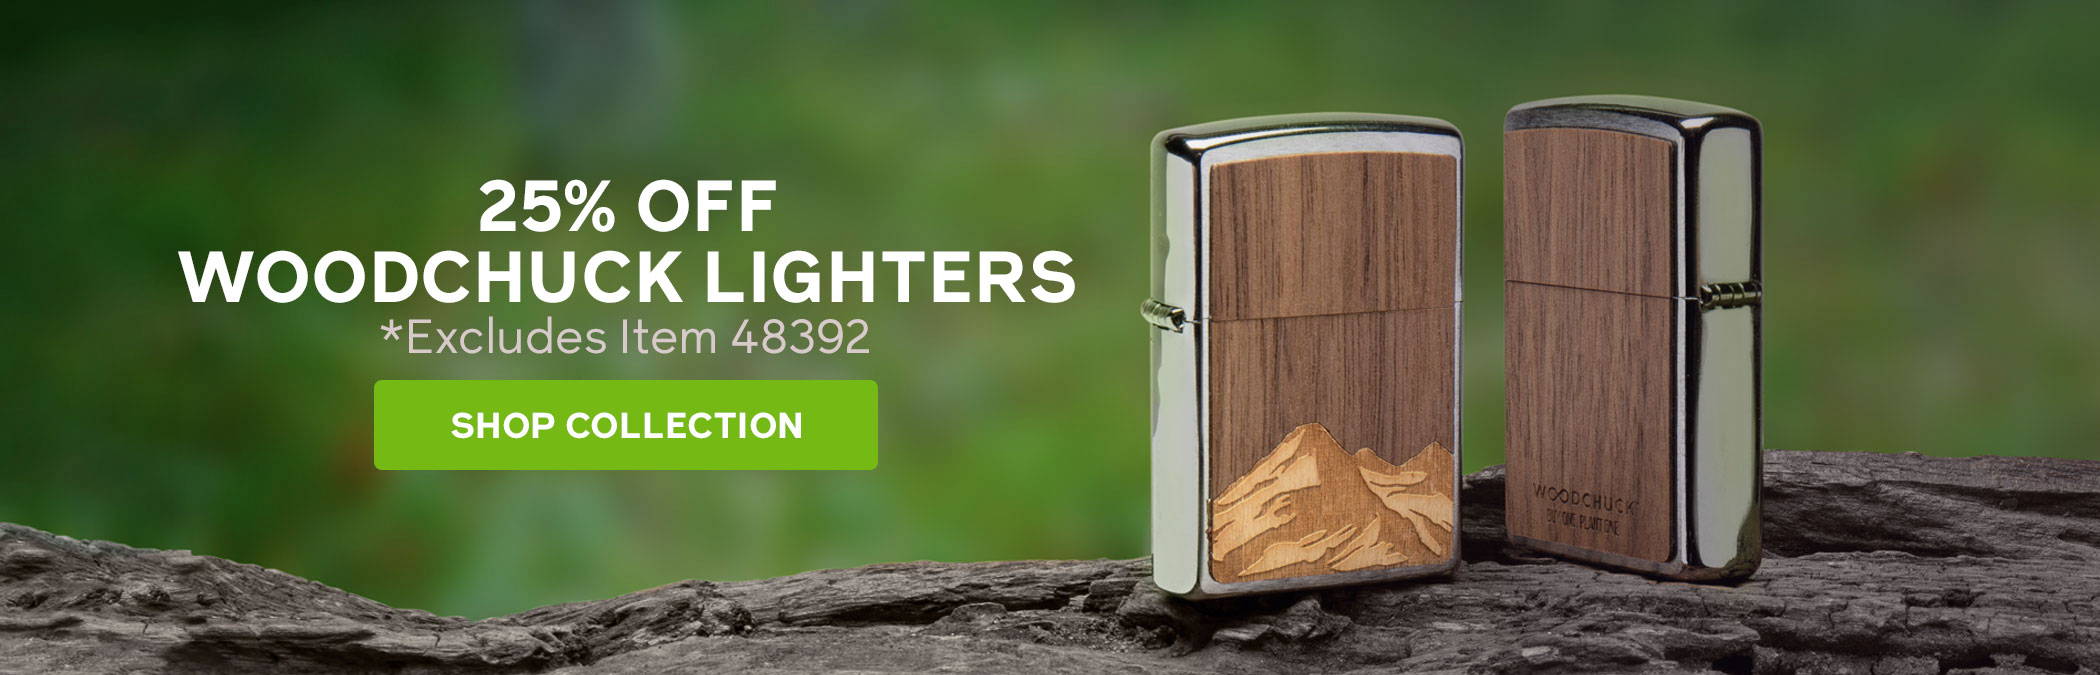 25% Off Woodchuck Lighters. Excludes Item 48392. Shop Collection.